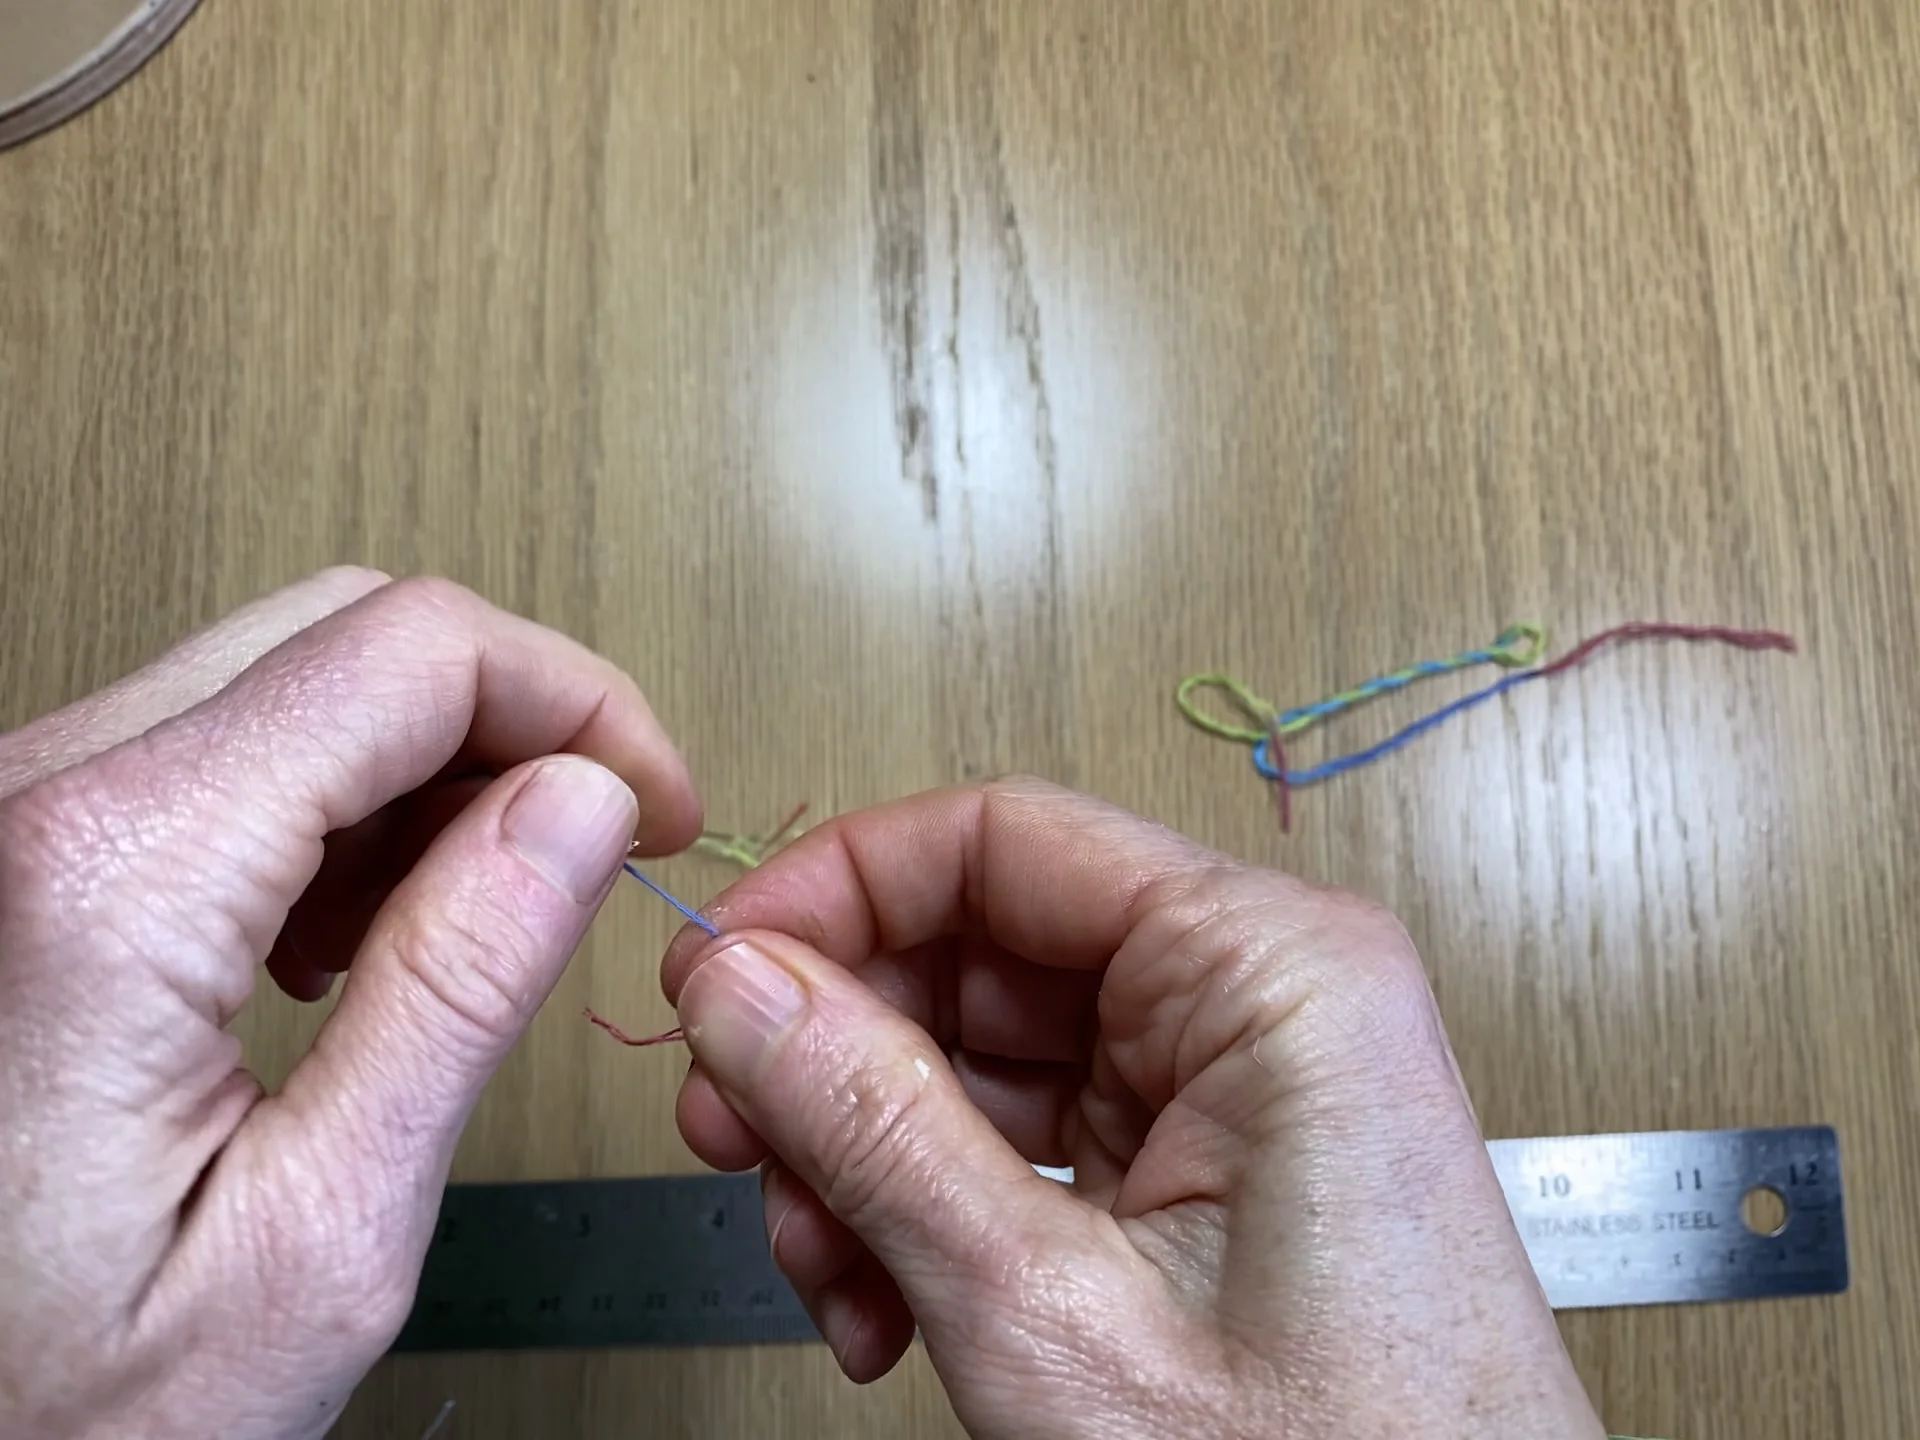 How to thread the Lavor punch needle embroidery tool on Vimeo